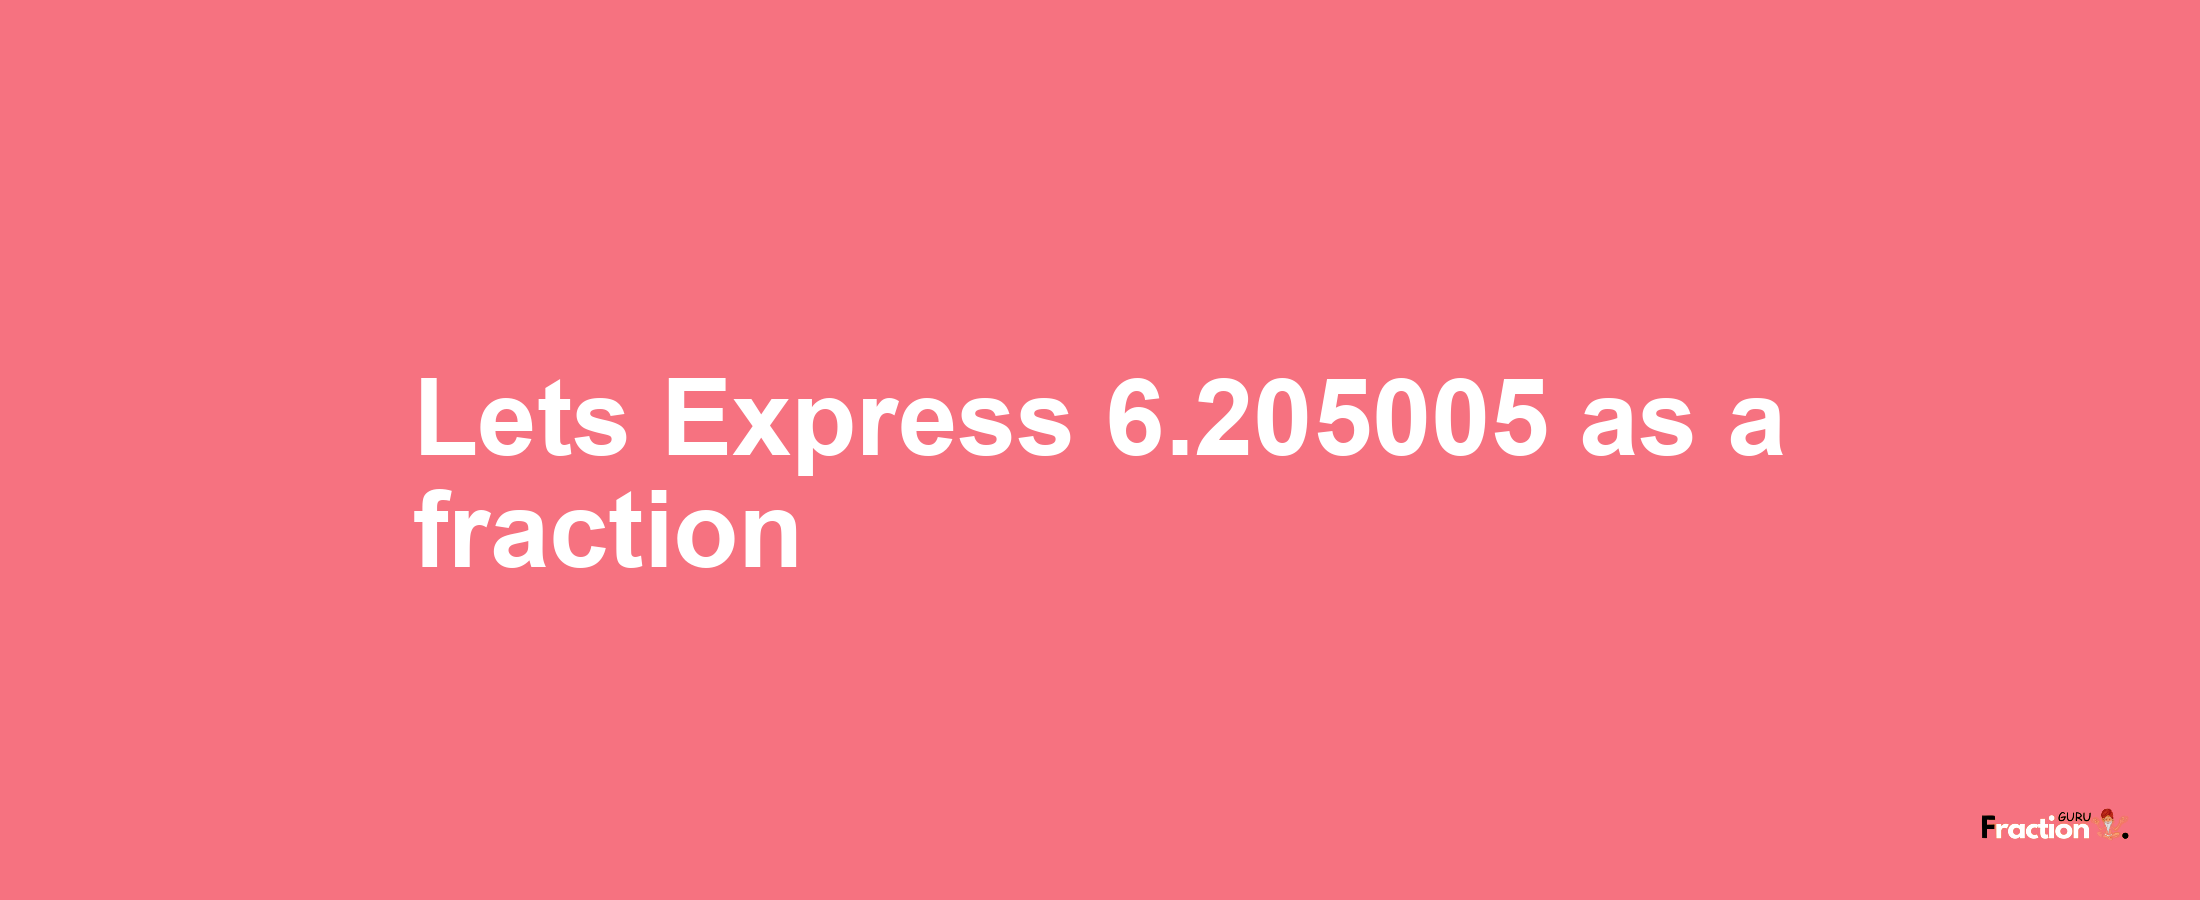 Lets Express 6.205005 as afraction